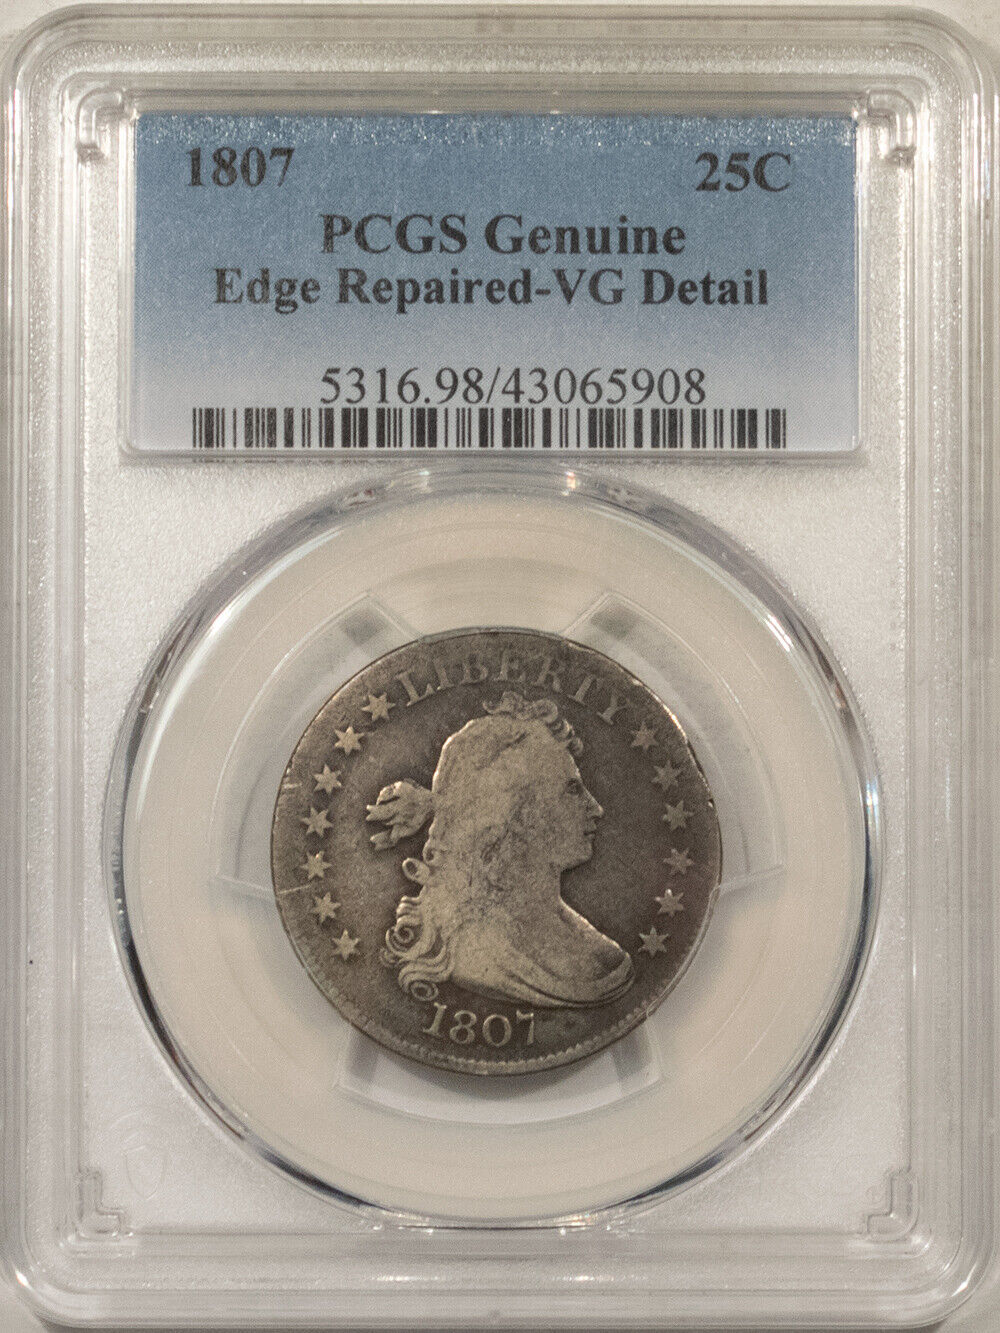 1807 Draped Bust Quarter Pcgs Genuine Edge Repaired - Vg Detail, Faces Up Nicely